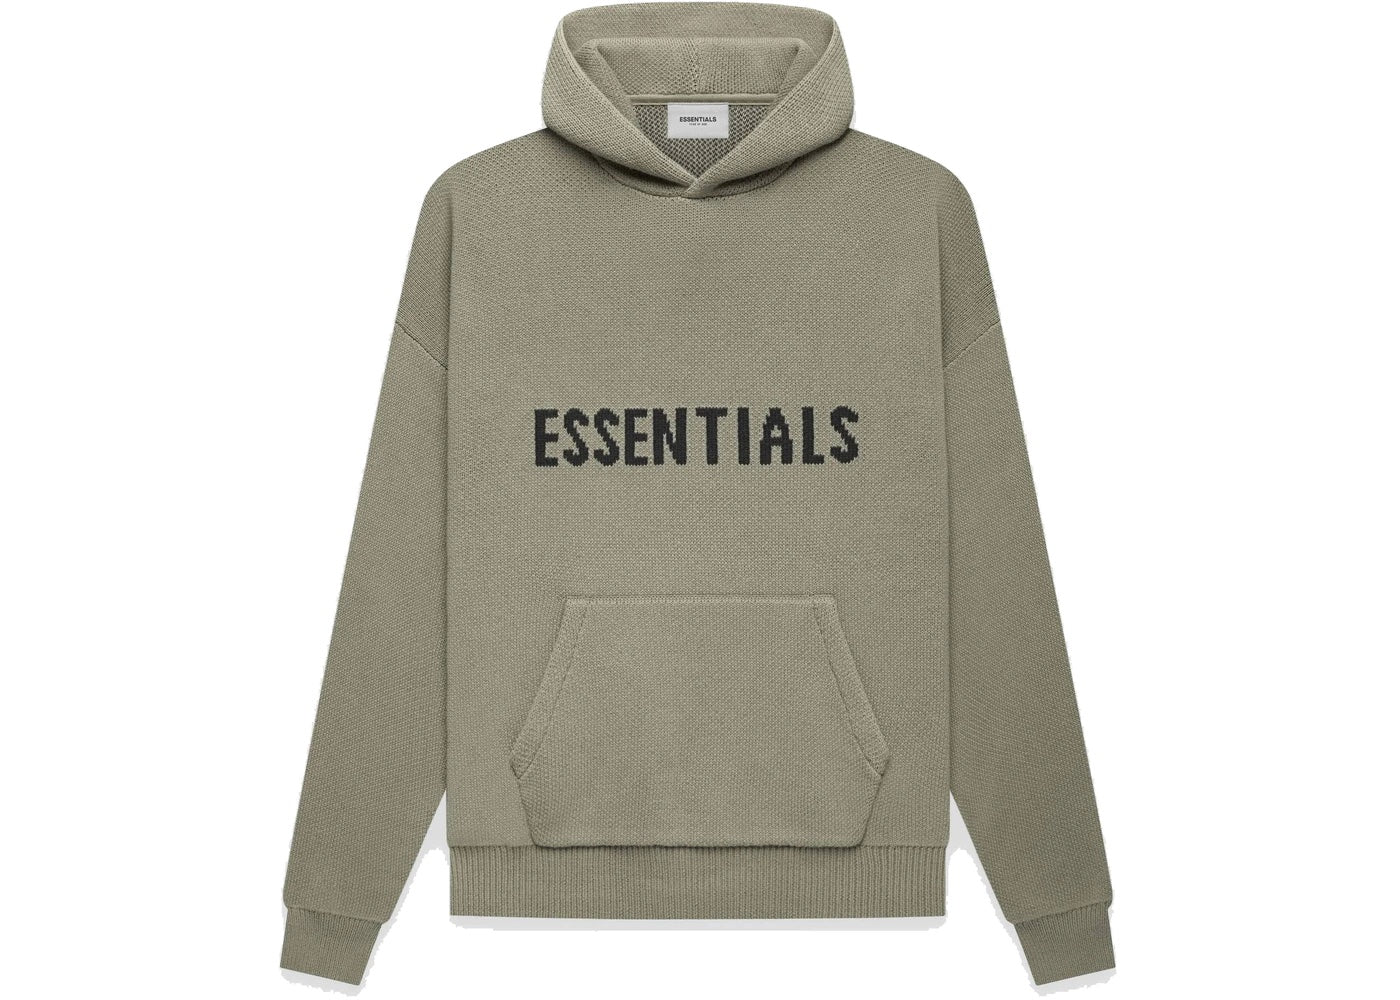 Fear of God Essentials Knit Pullover Hoodie - Pistachio